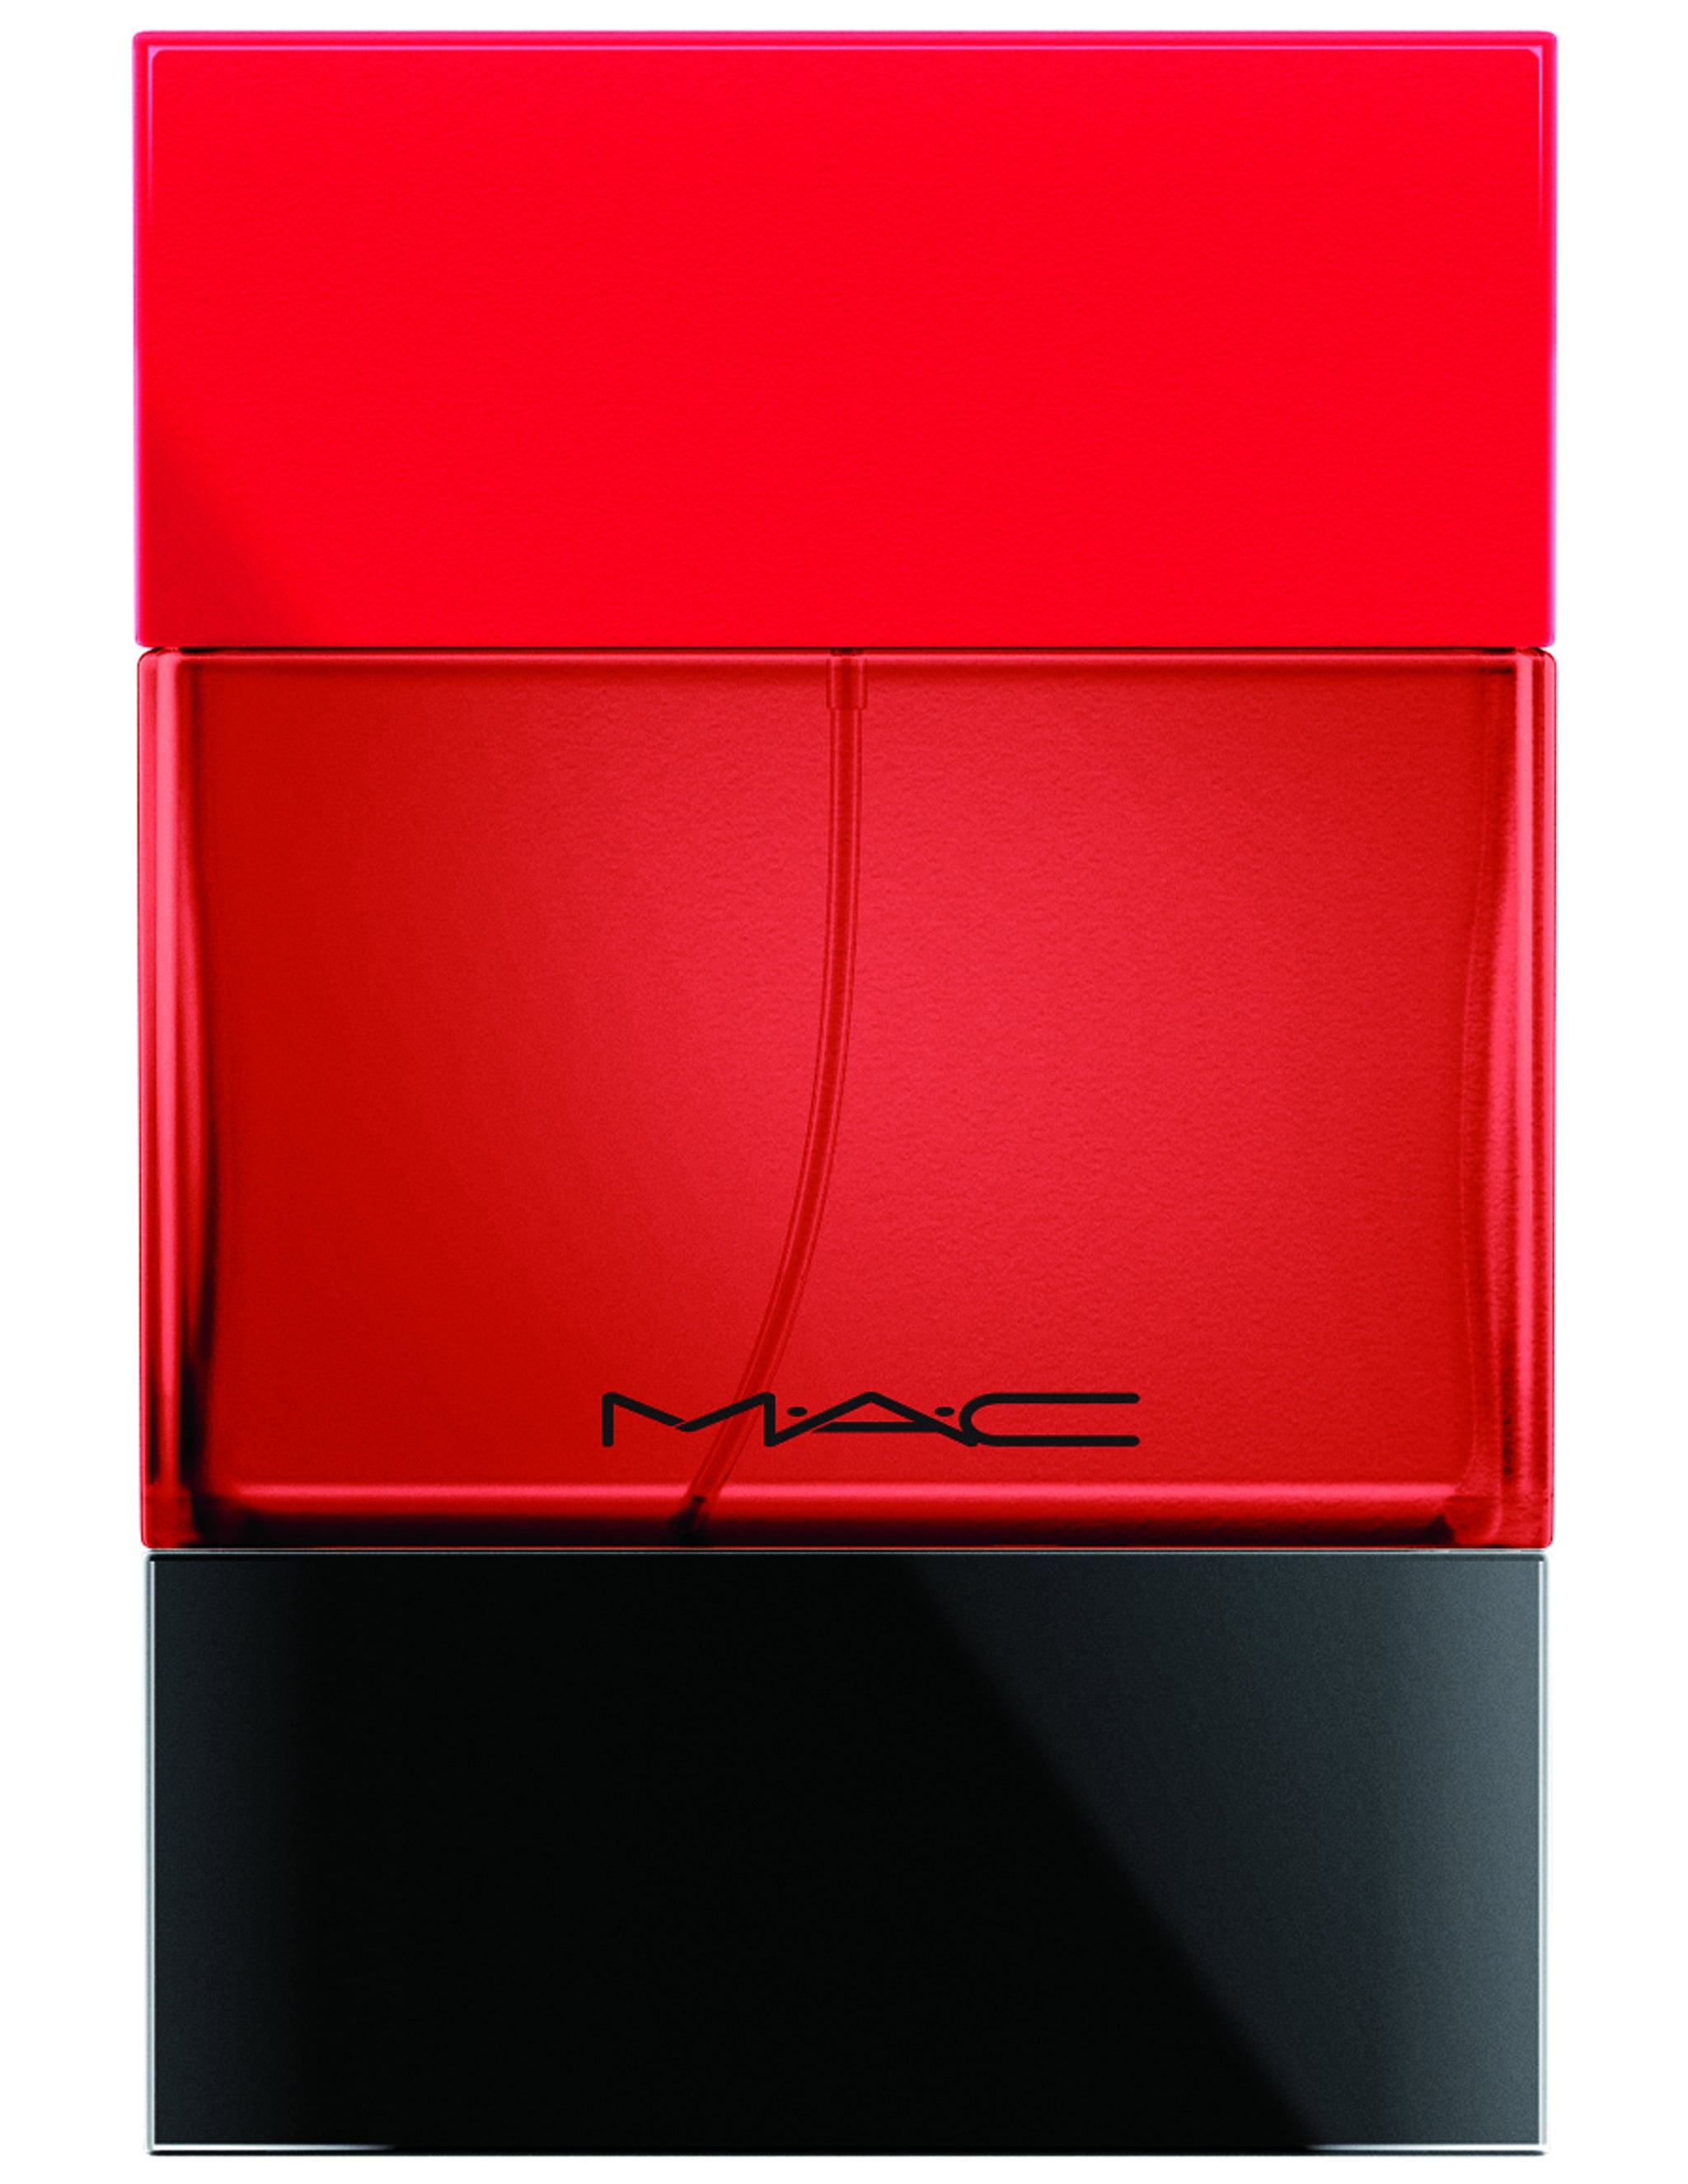 Mac Cosmetics Lady Danger Fragrance You Can Now Coordinate Your Ruby Woo Lipstick With A Matching Mac Perfume Popsugar Beauty Photo 8